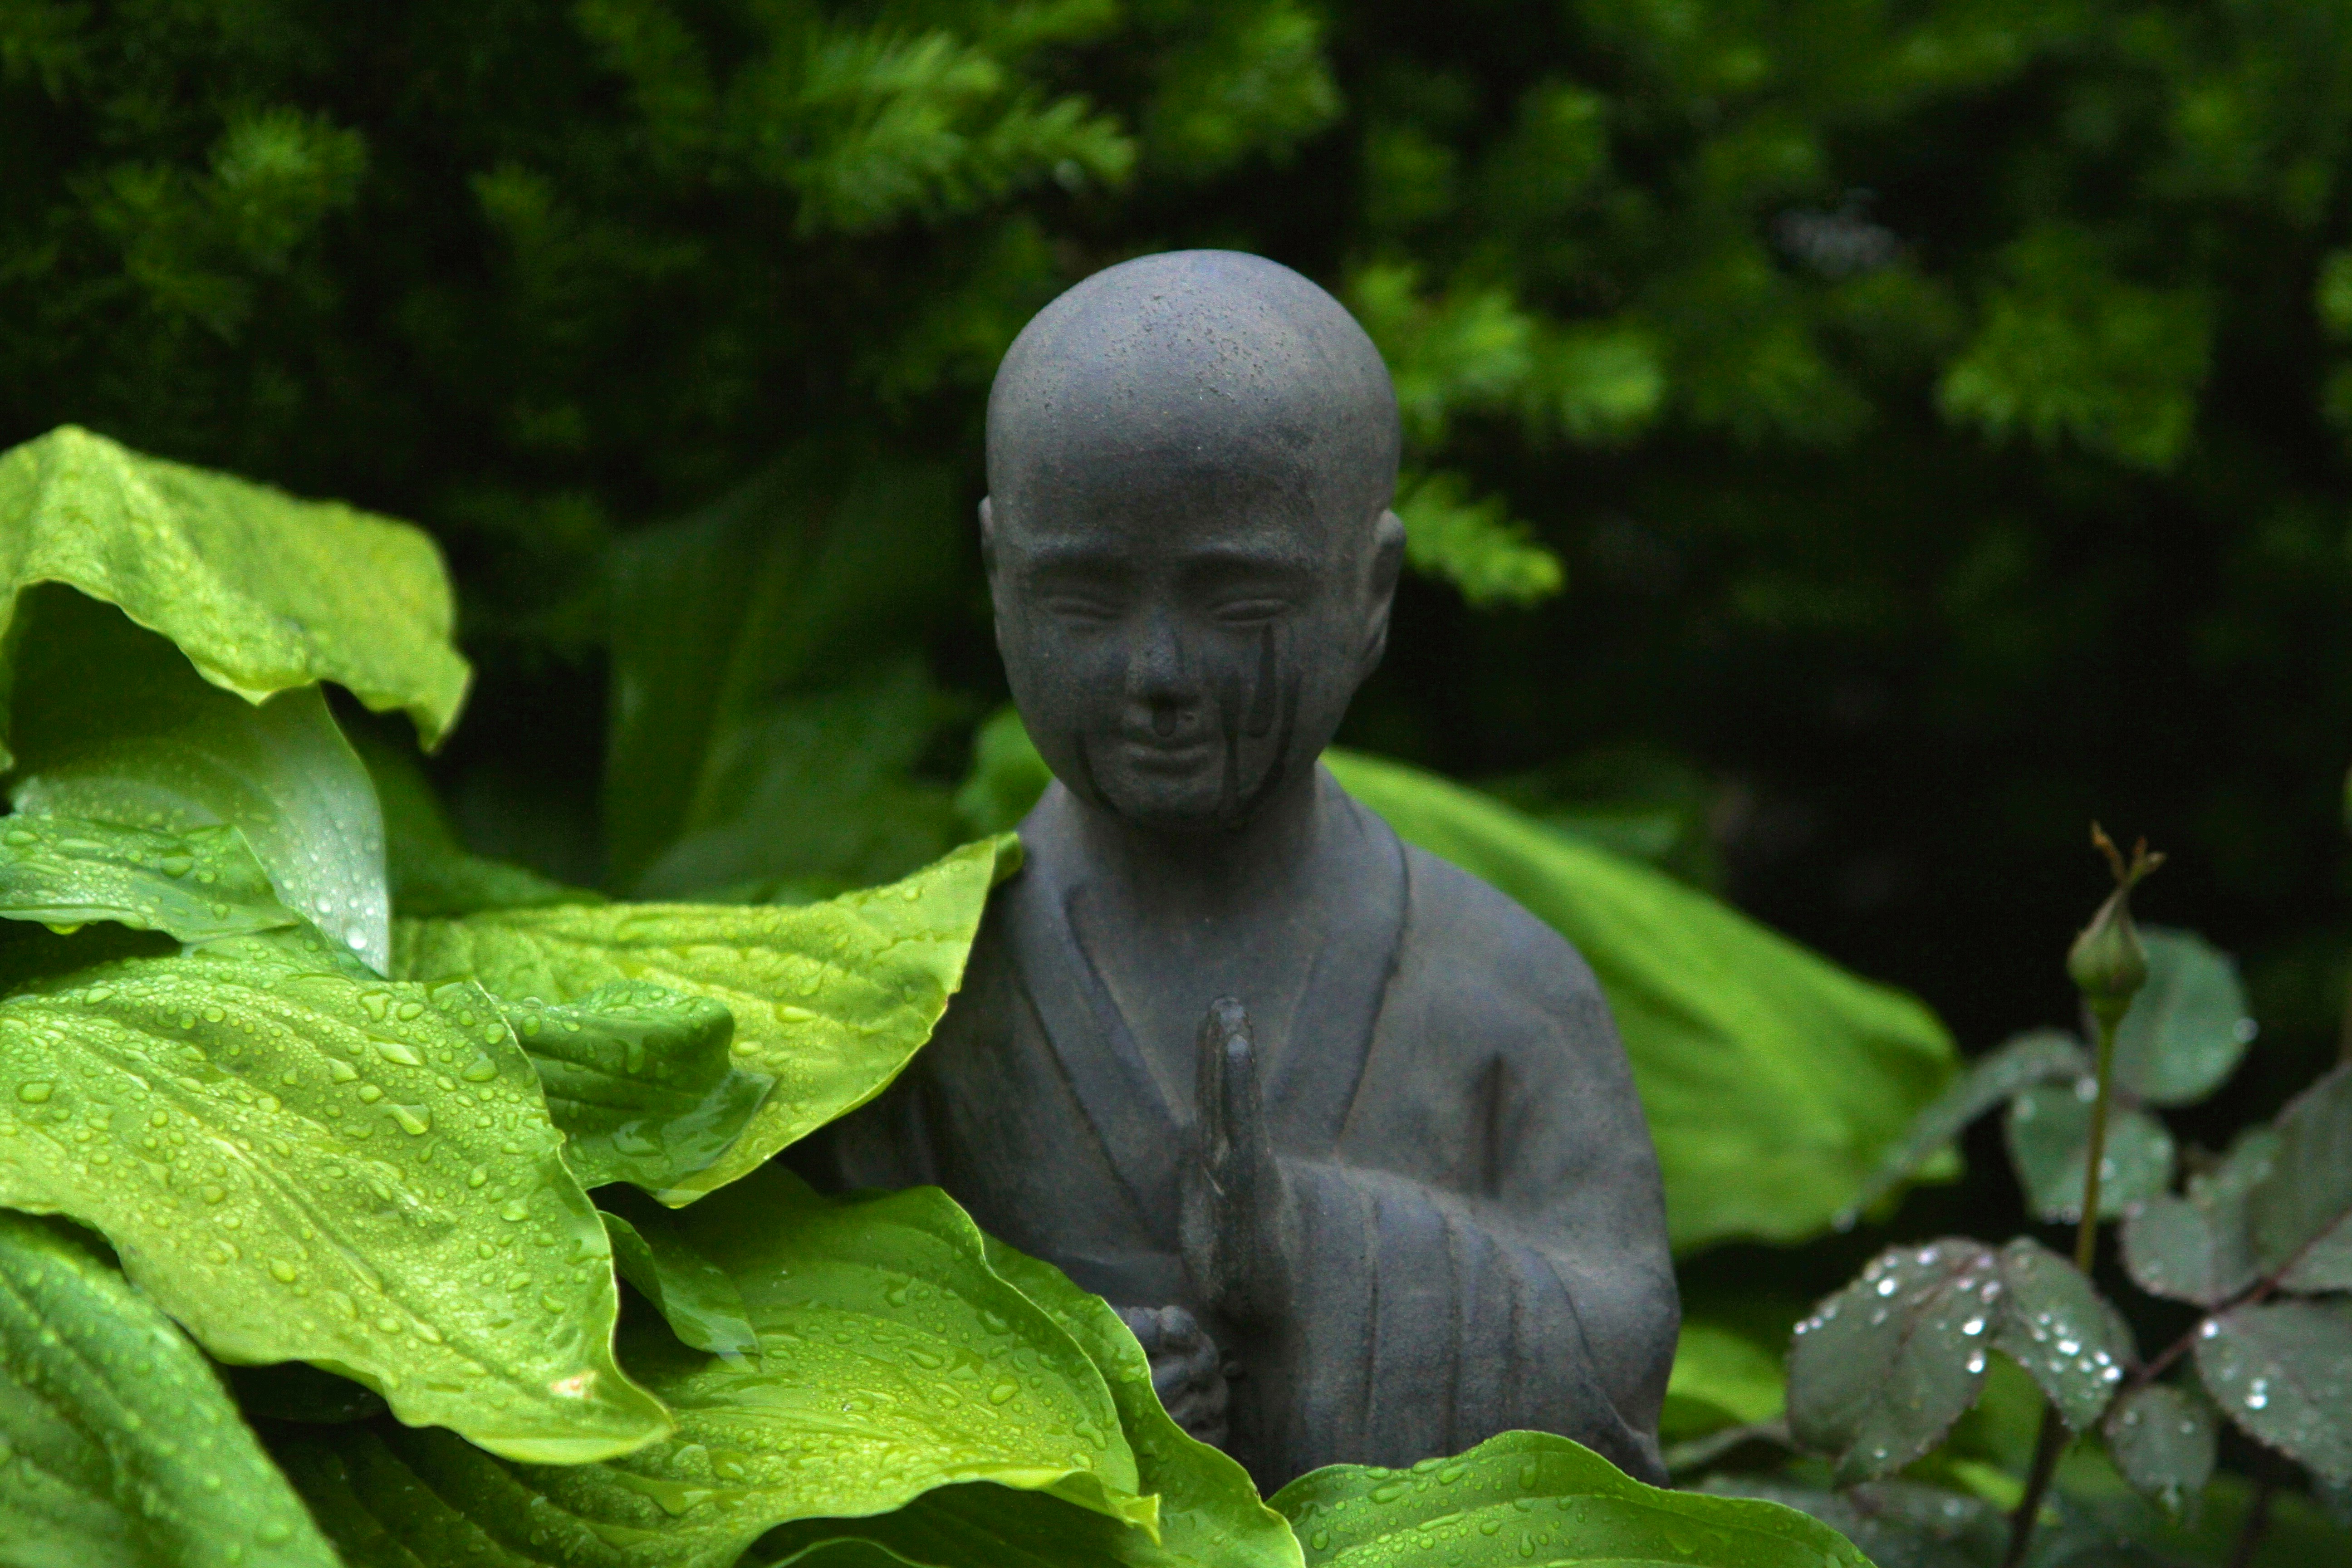 monk statue surrounded by plants outdoor during day